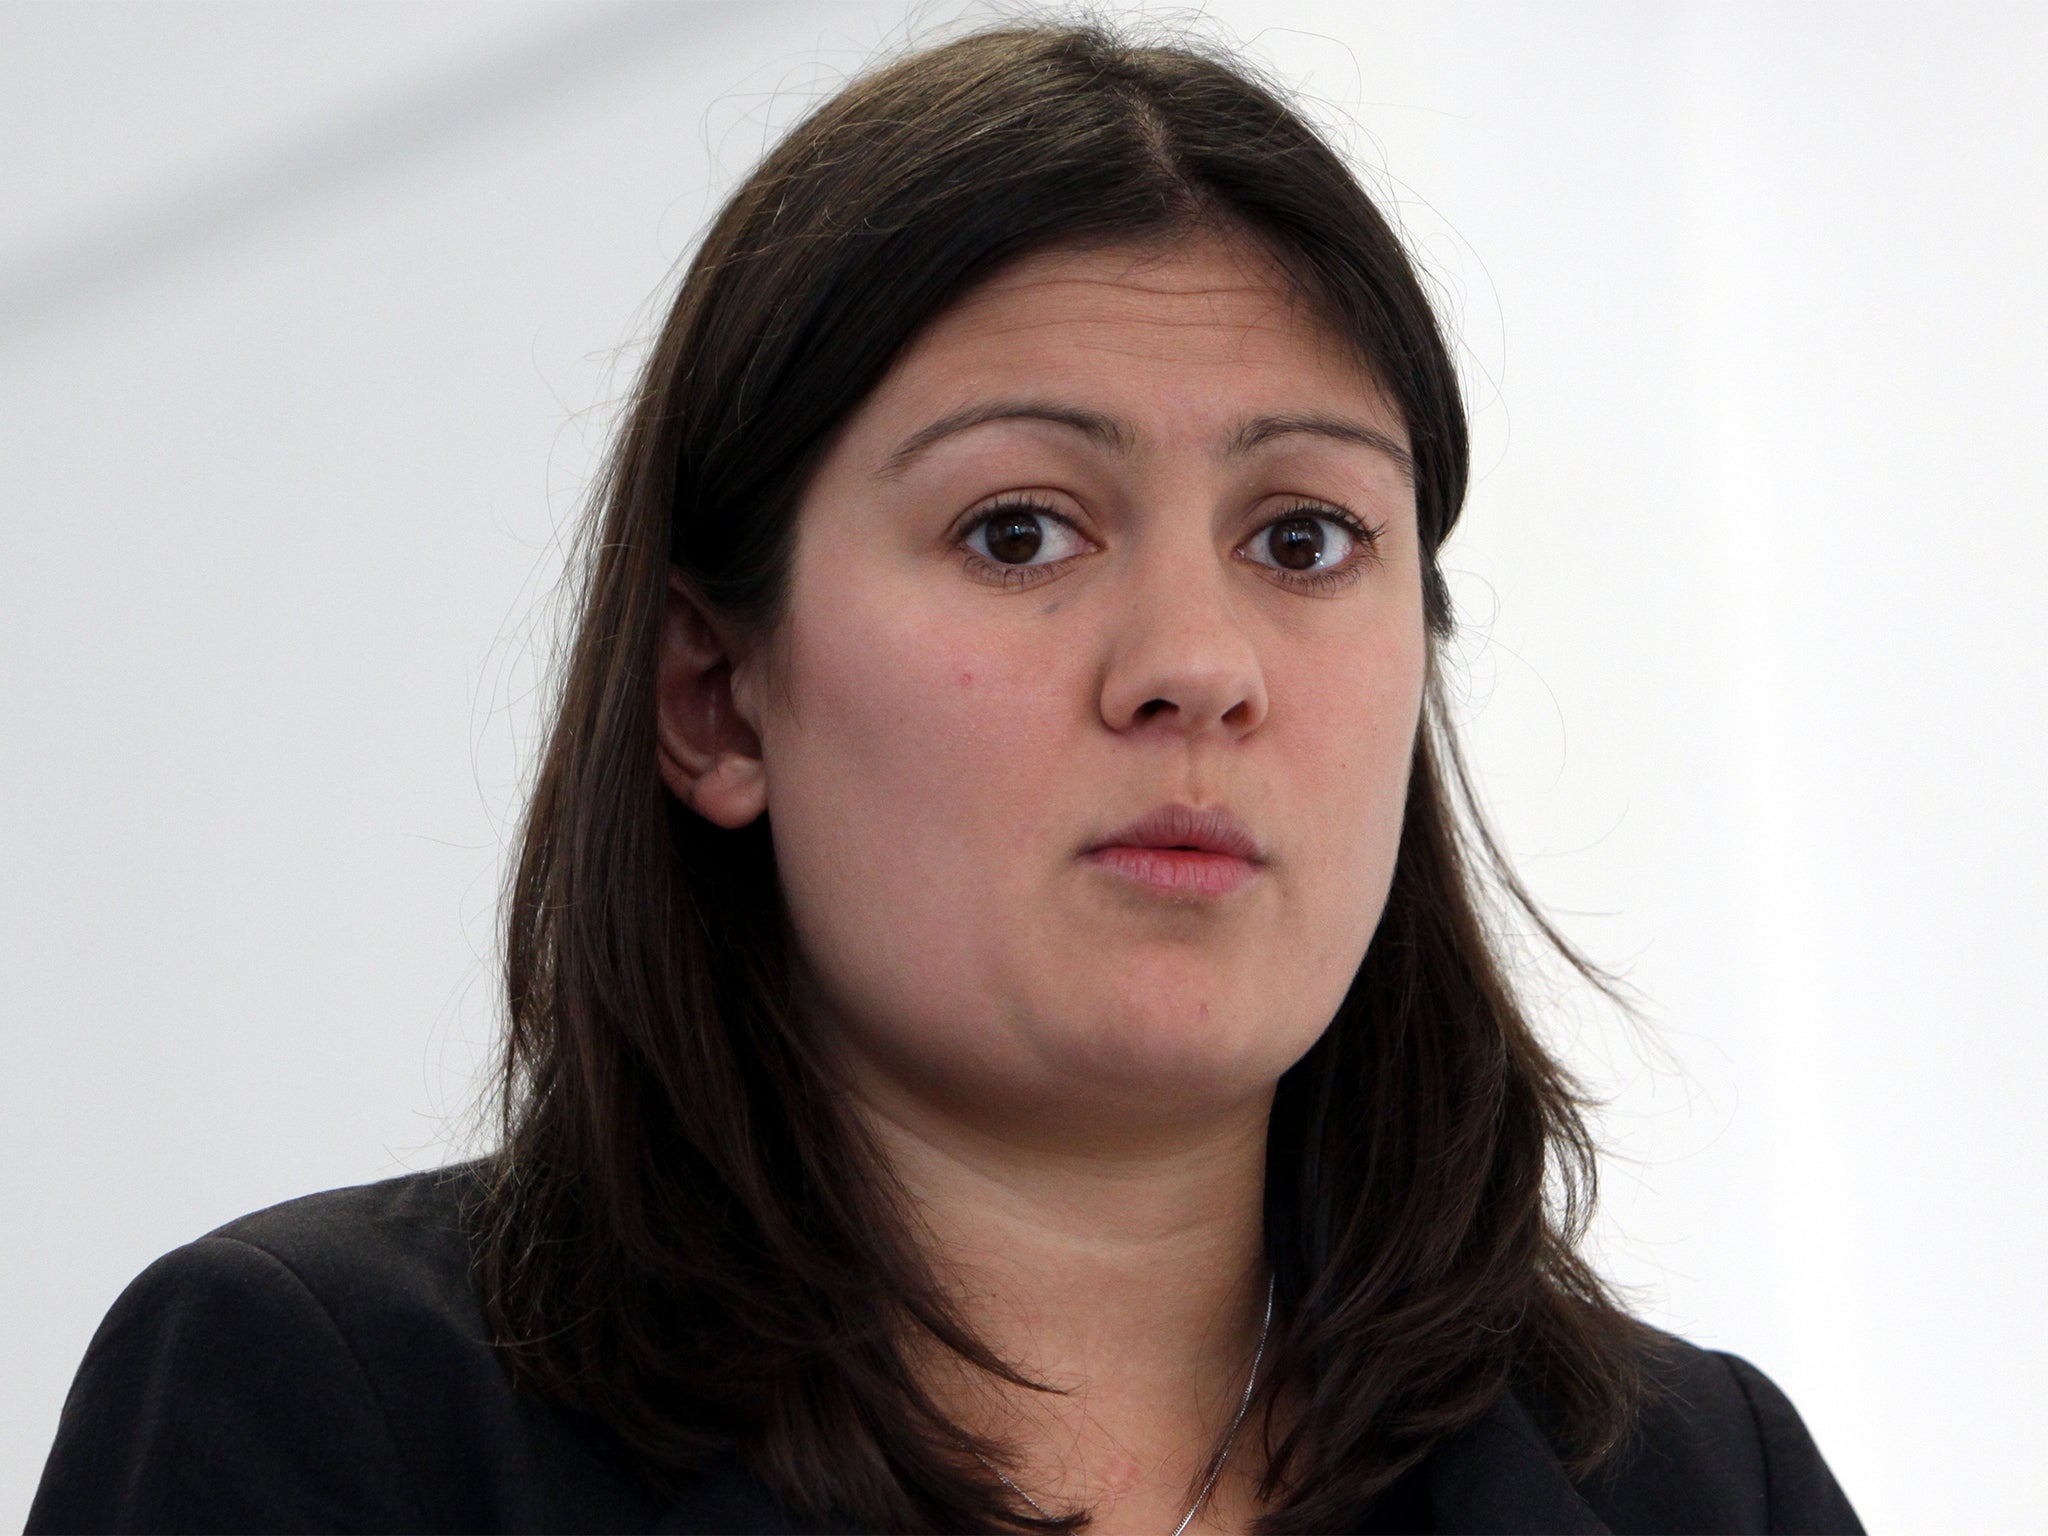 Lisa Nandy is Labour's shadow climate change and energy minister